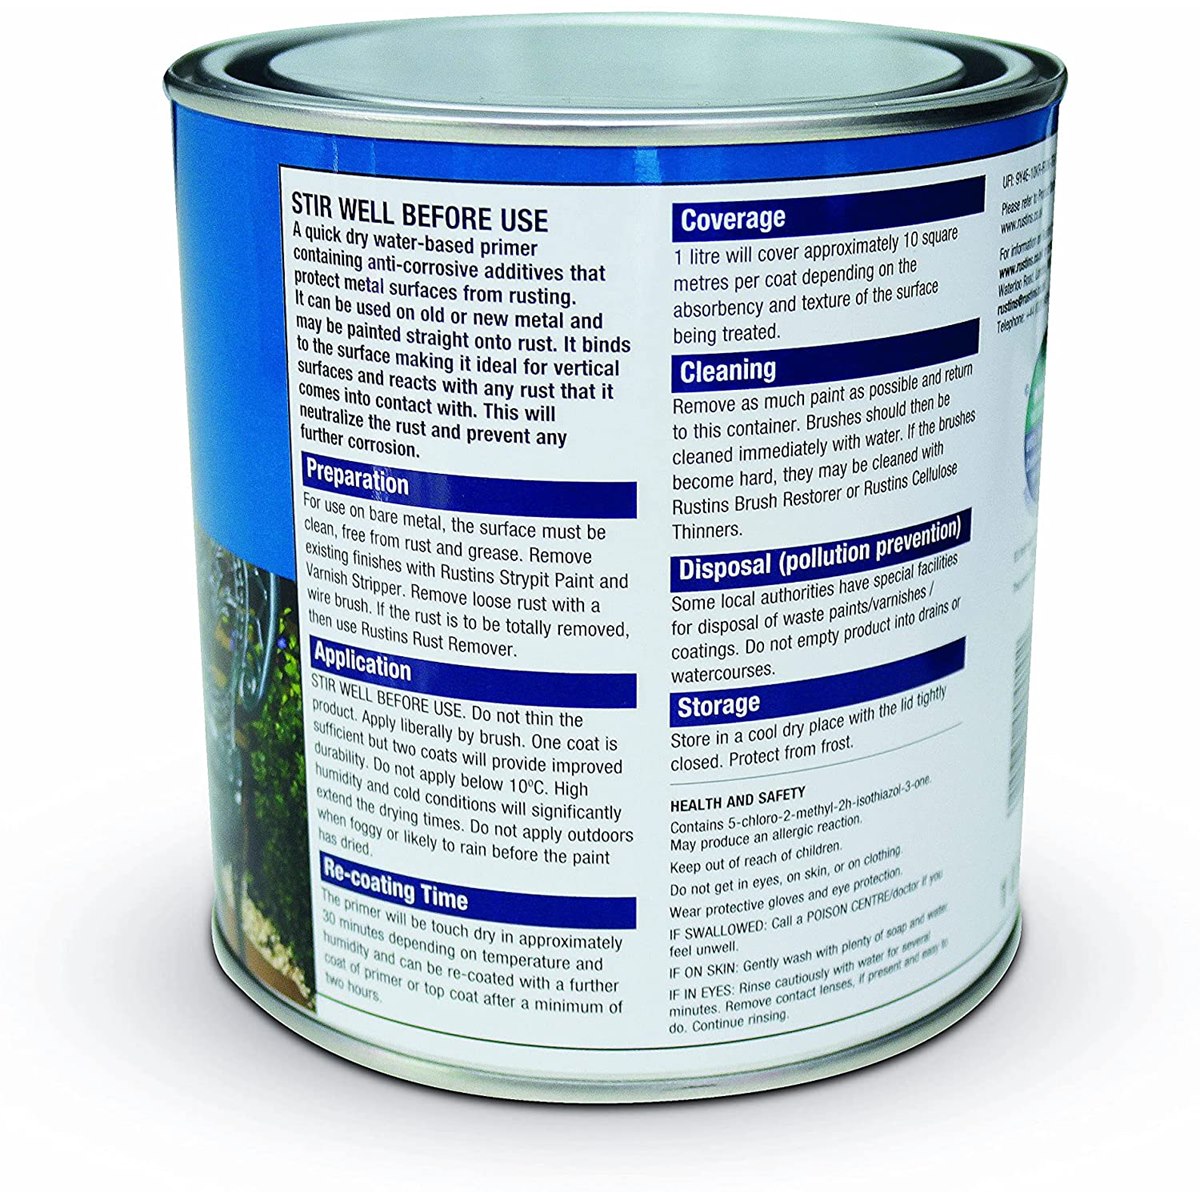 How to use Rustins Anti-Corrosion Metal Primer